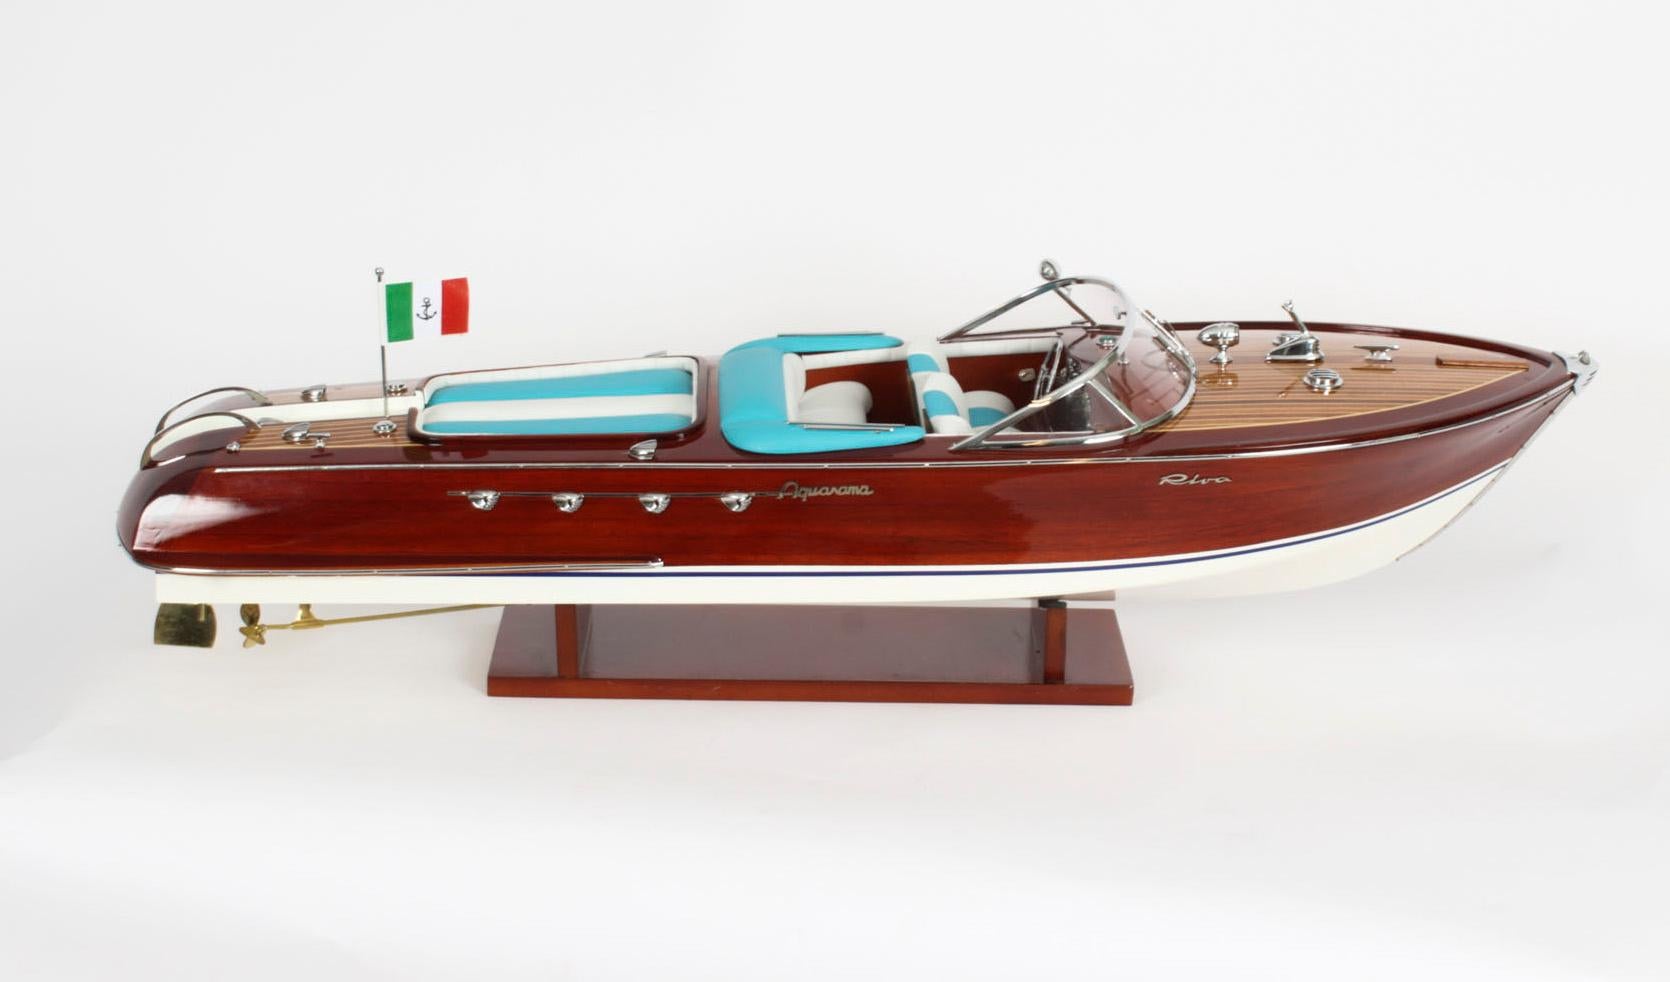 This is an exceptional handbuilt model of the “Riva Aquarama”, a luxury wooden launch built by the Italian yactbuilder Riva and  late 20th Century in date.

In production from 1962 to 1996, the Aquarama was the most famous of Carlo Riva’s luxury